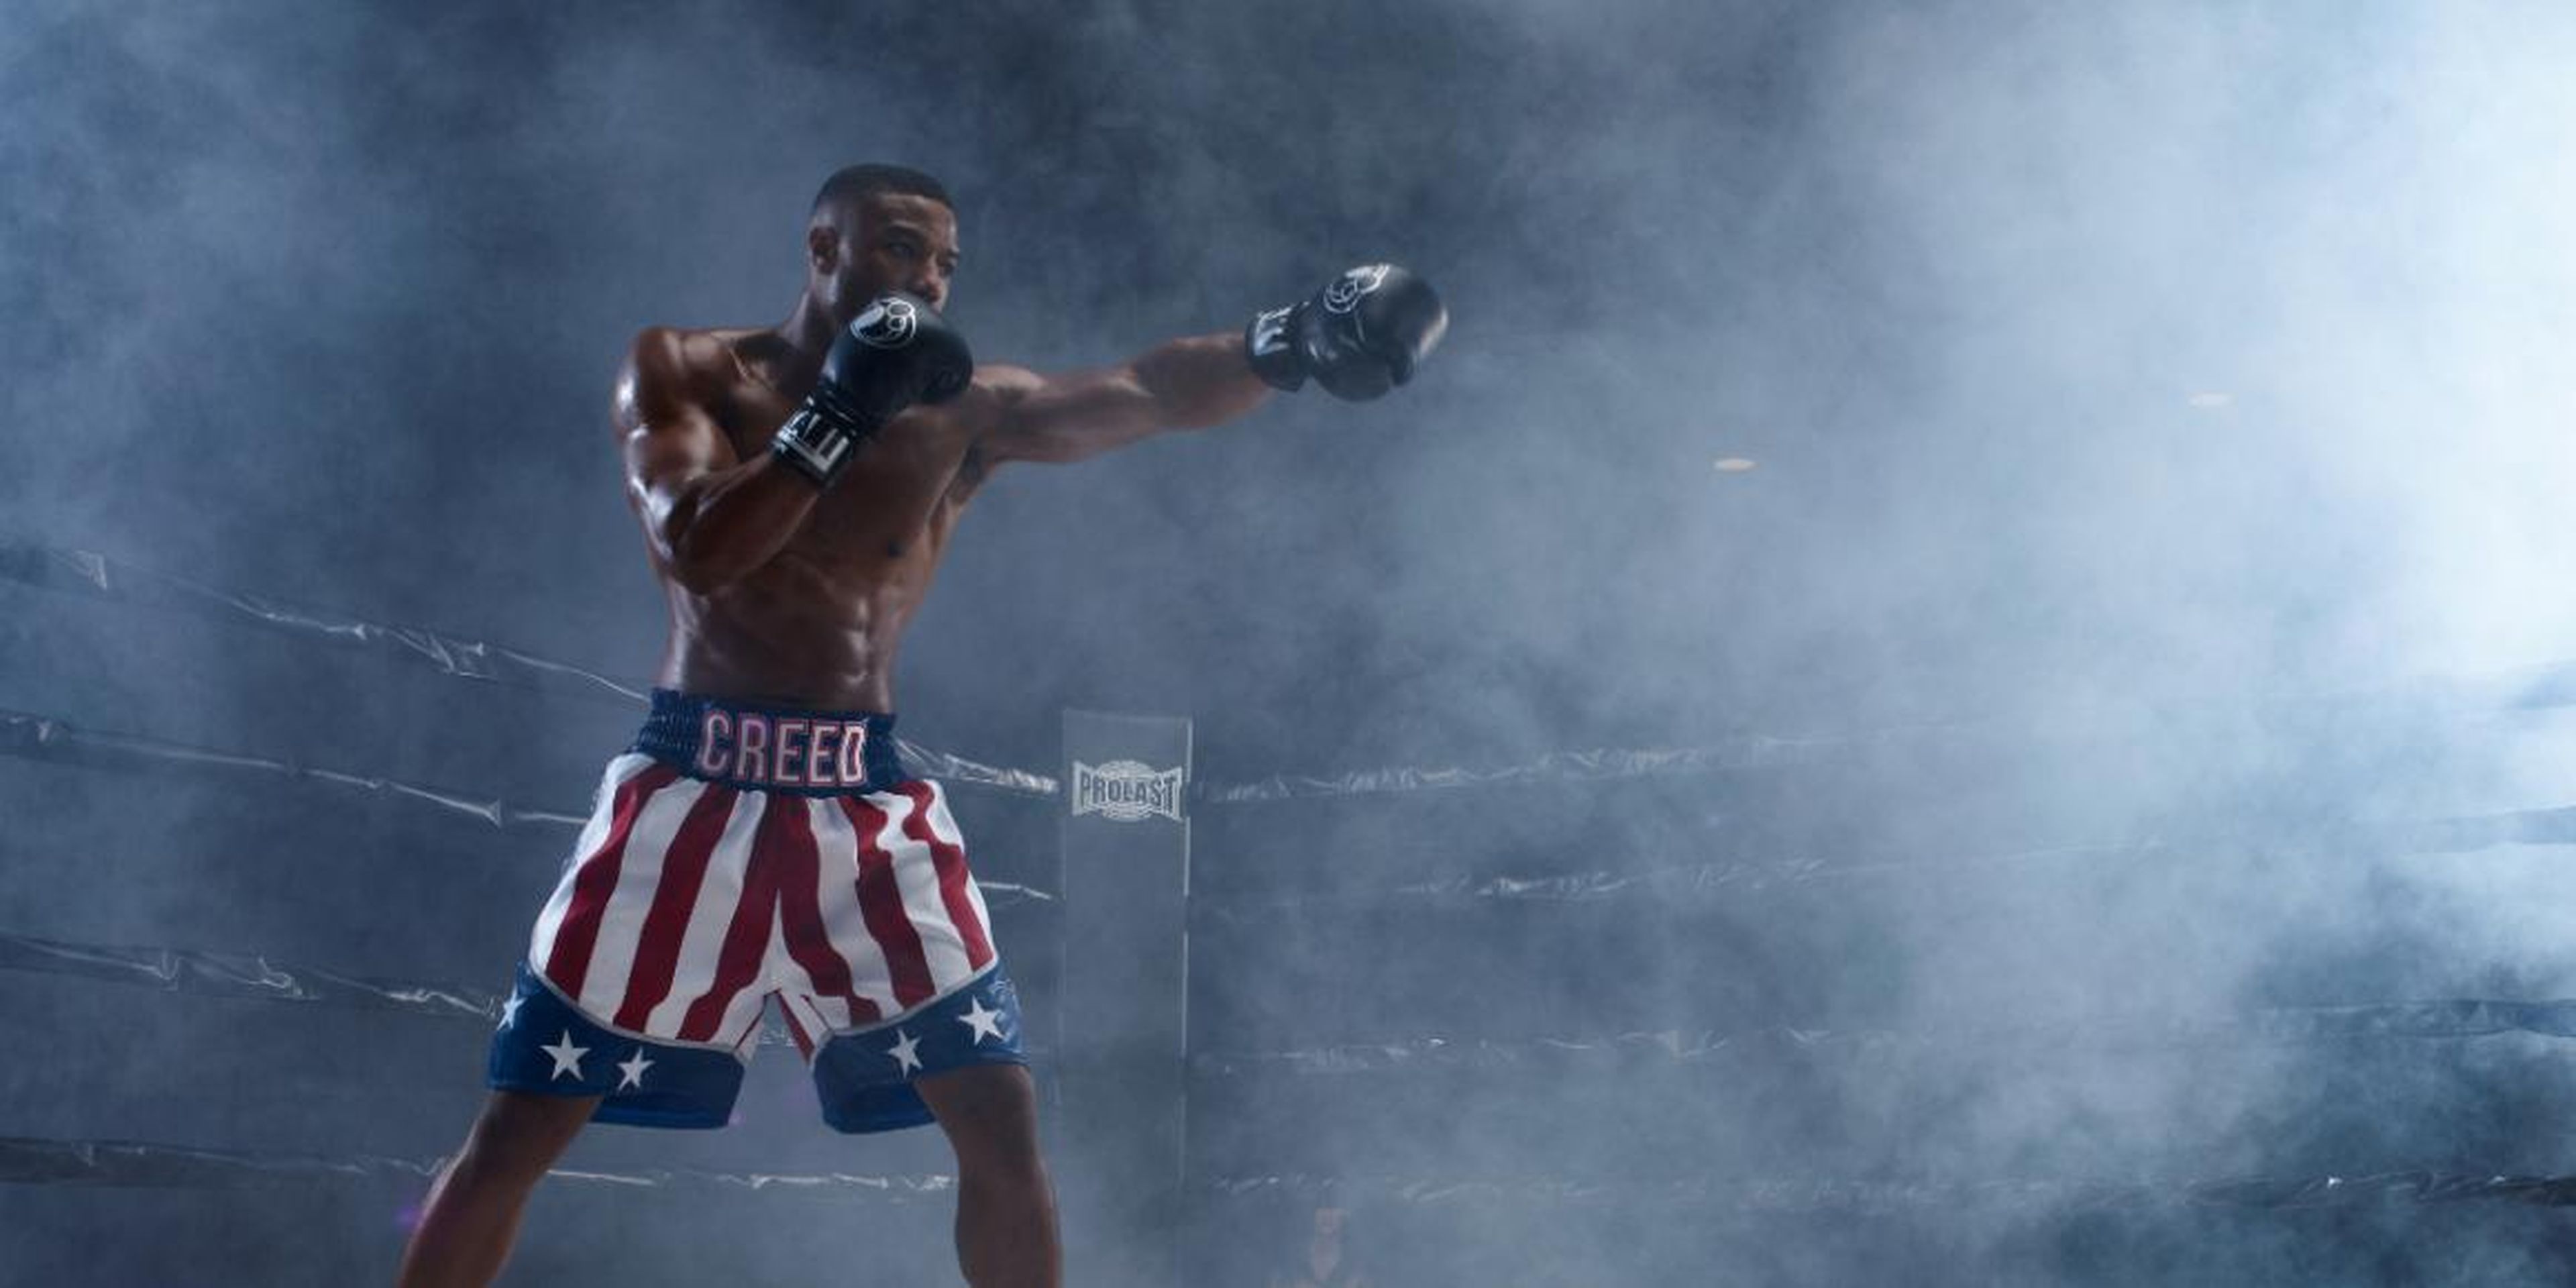 Movies like "Creed II" and "Uncle Drew" rocked the box office this year, but neither topped our list of best sports movies and documentaries of 2018.